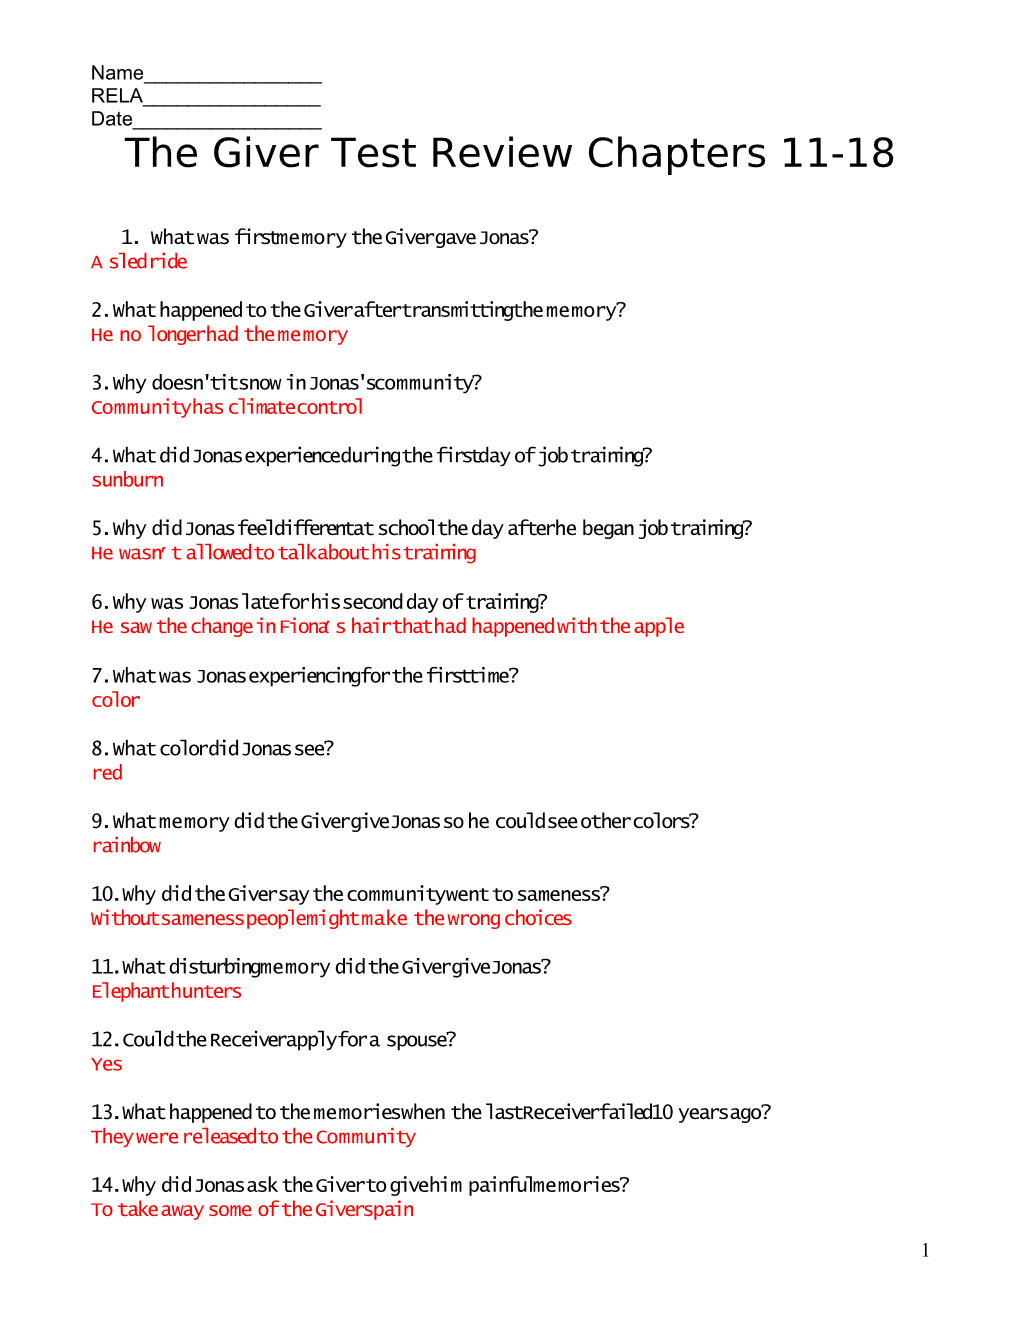 The Giver Test Review Chapters 11-18